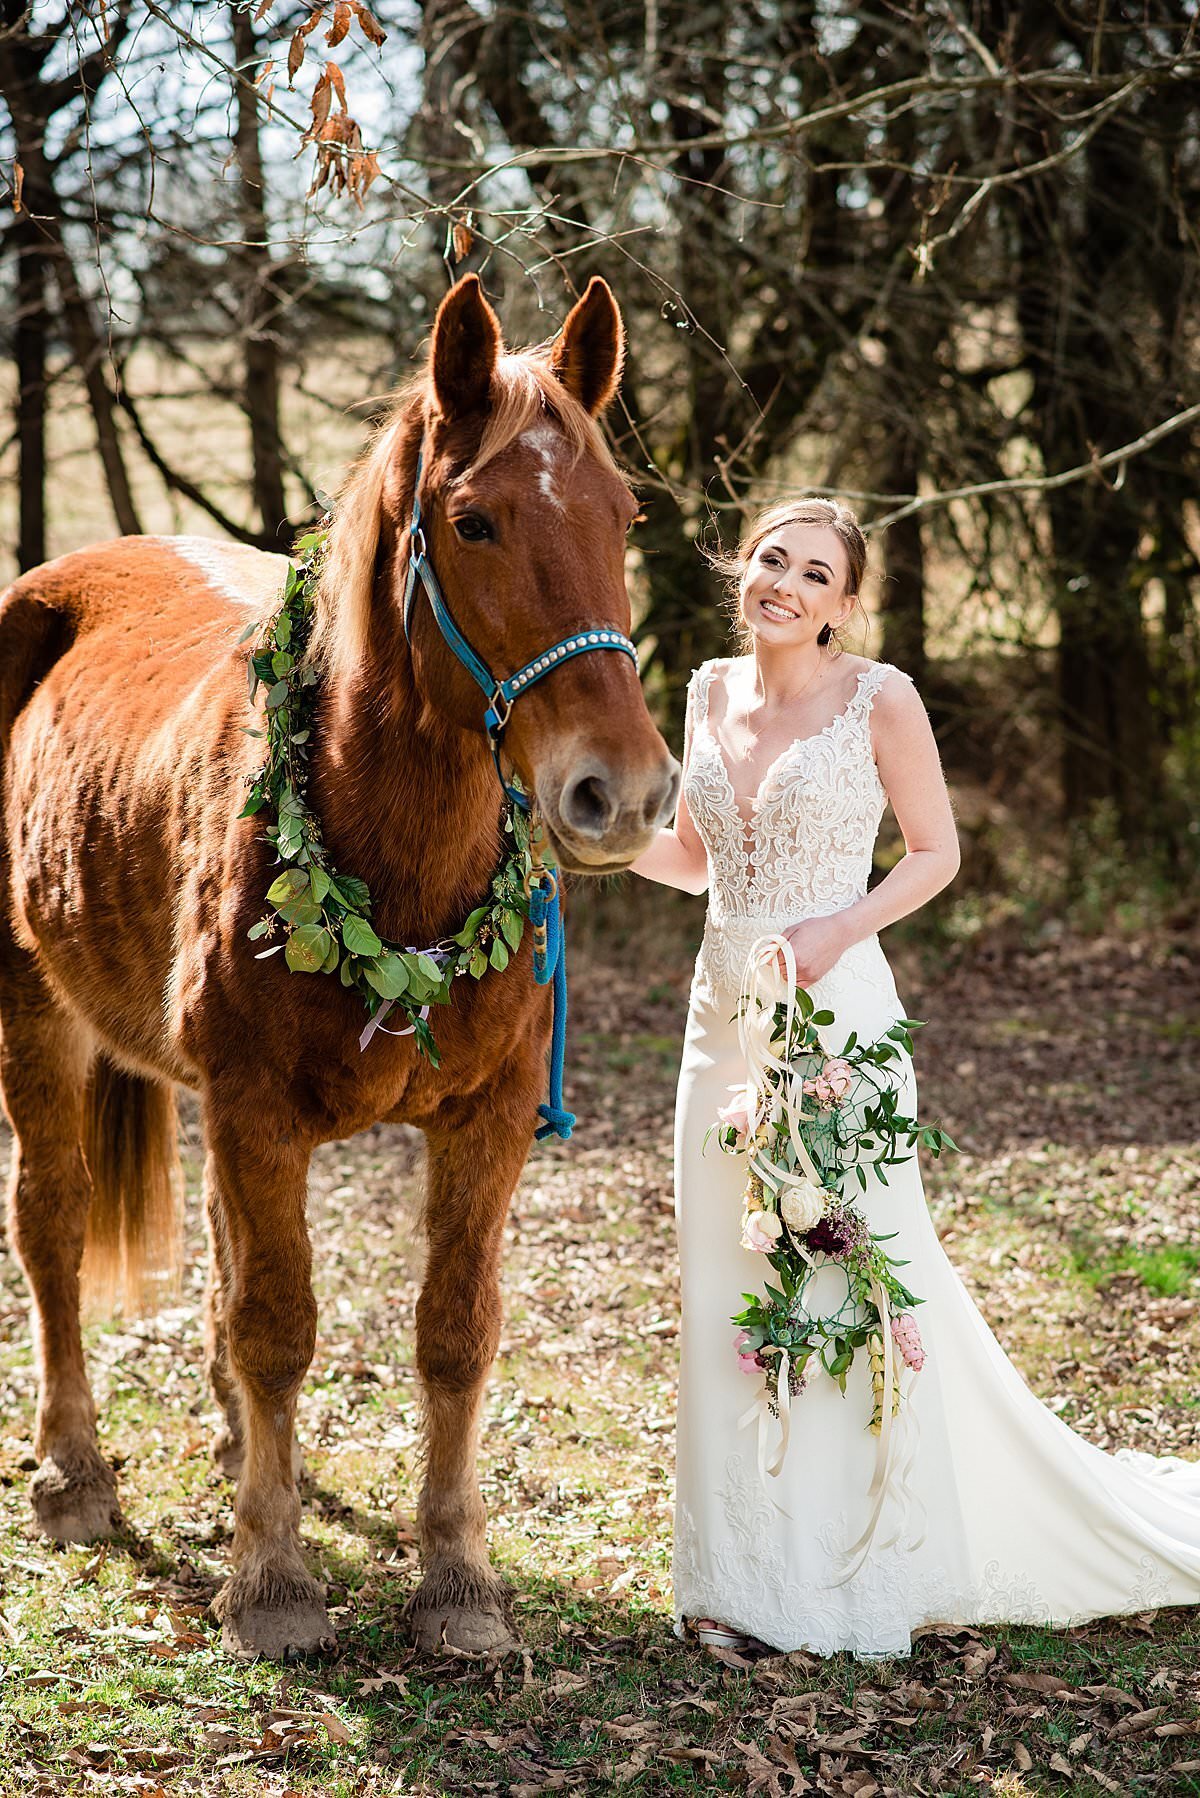 Bride holding a whimsical dream catcher with florals and standing beside her horse